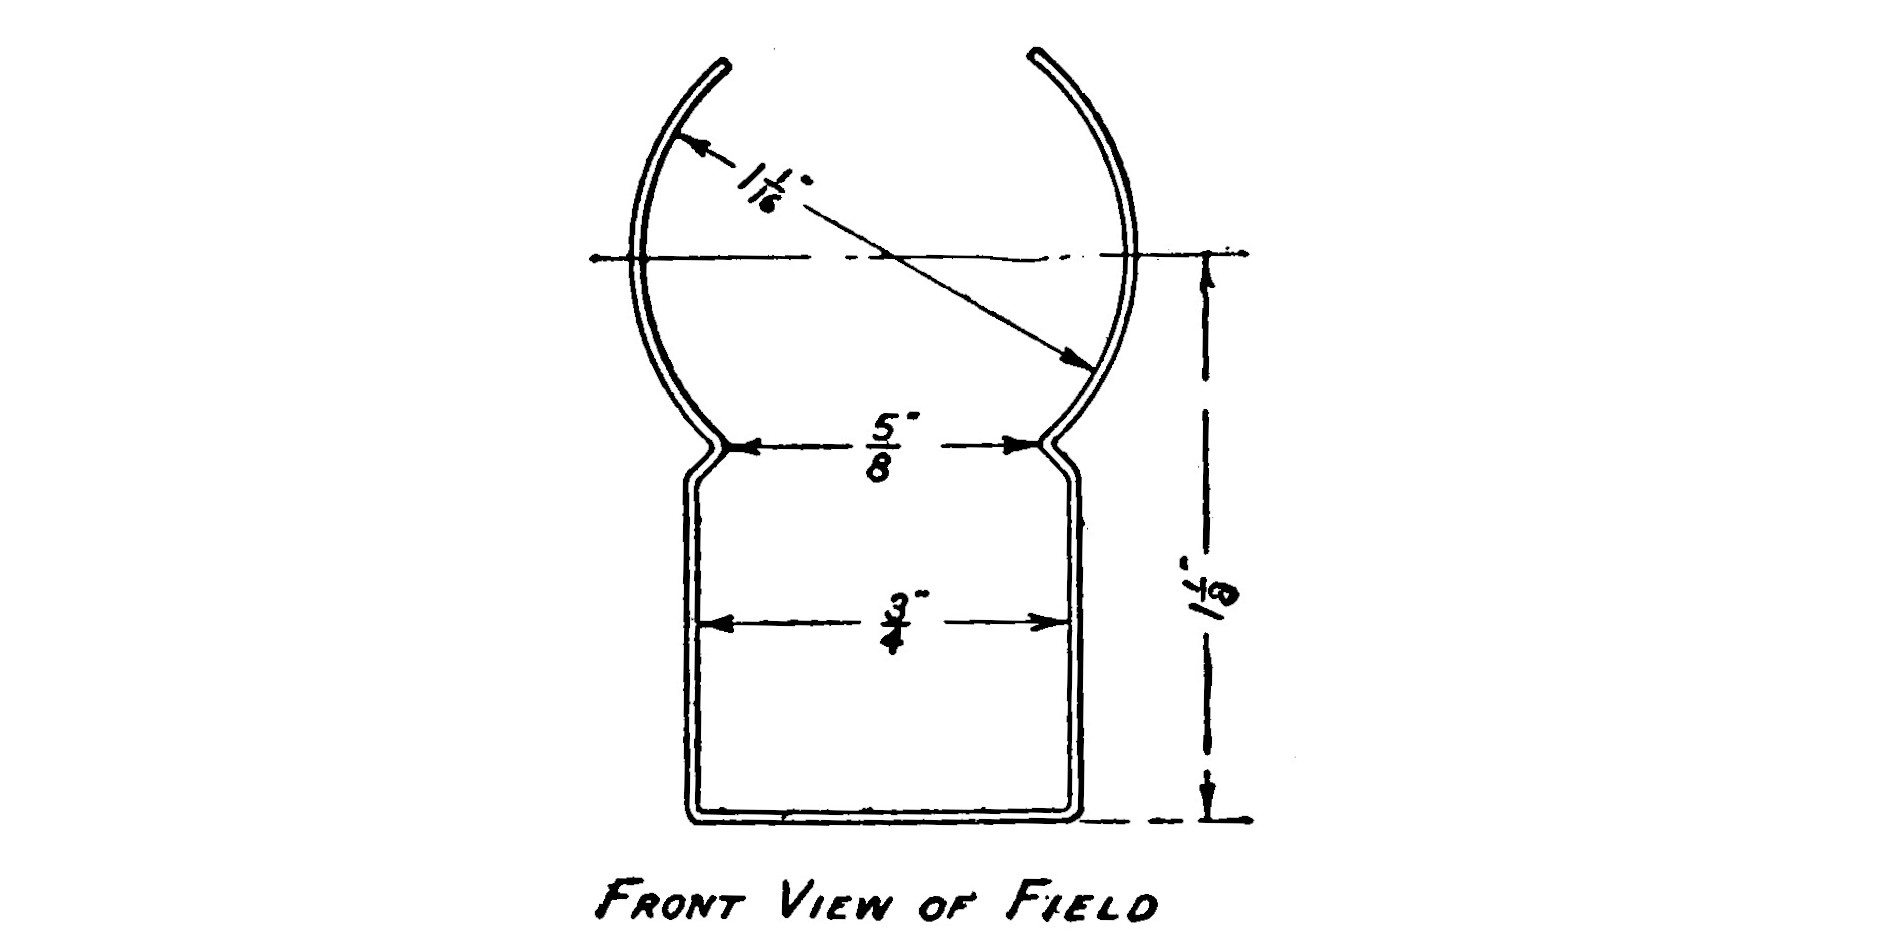 FIG. 26.—Details of the Field Frame for the "Overtype" Motor.